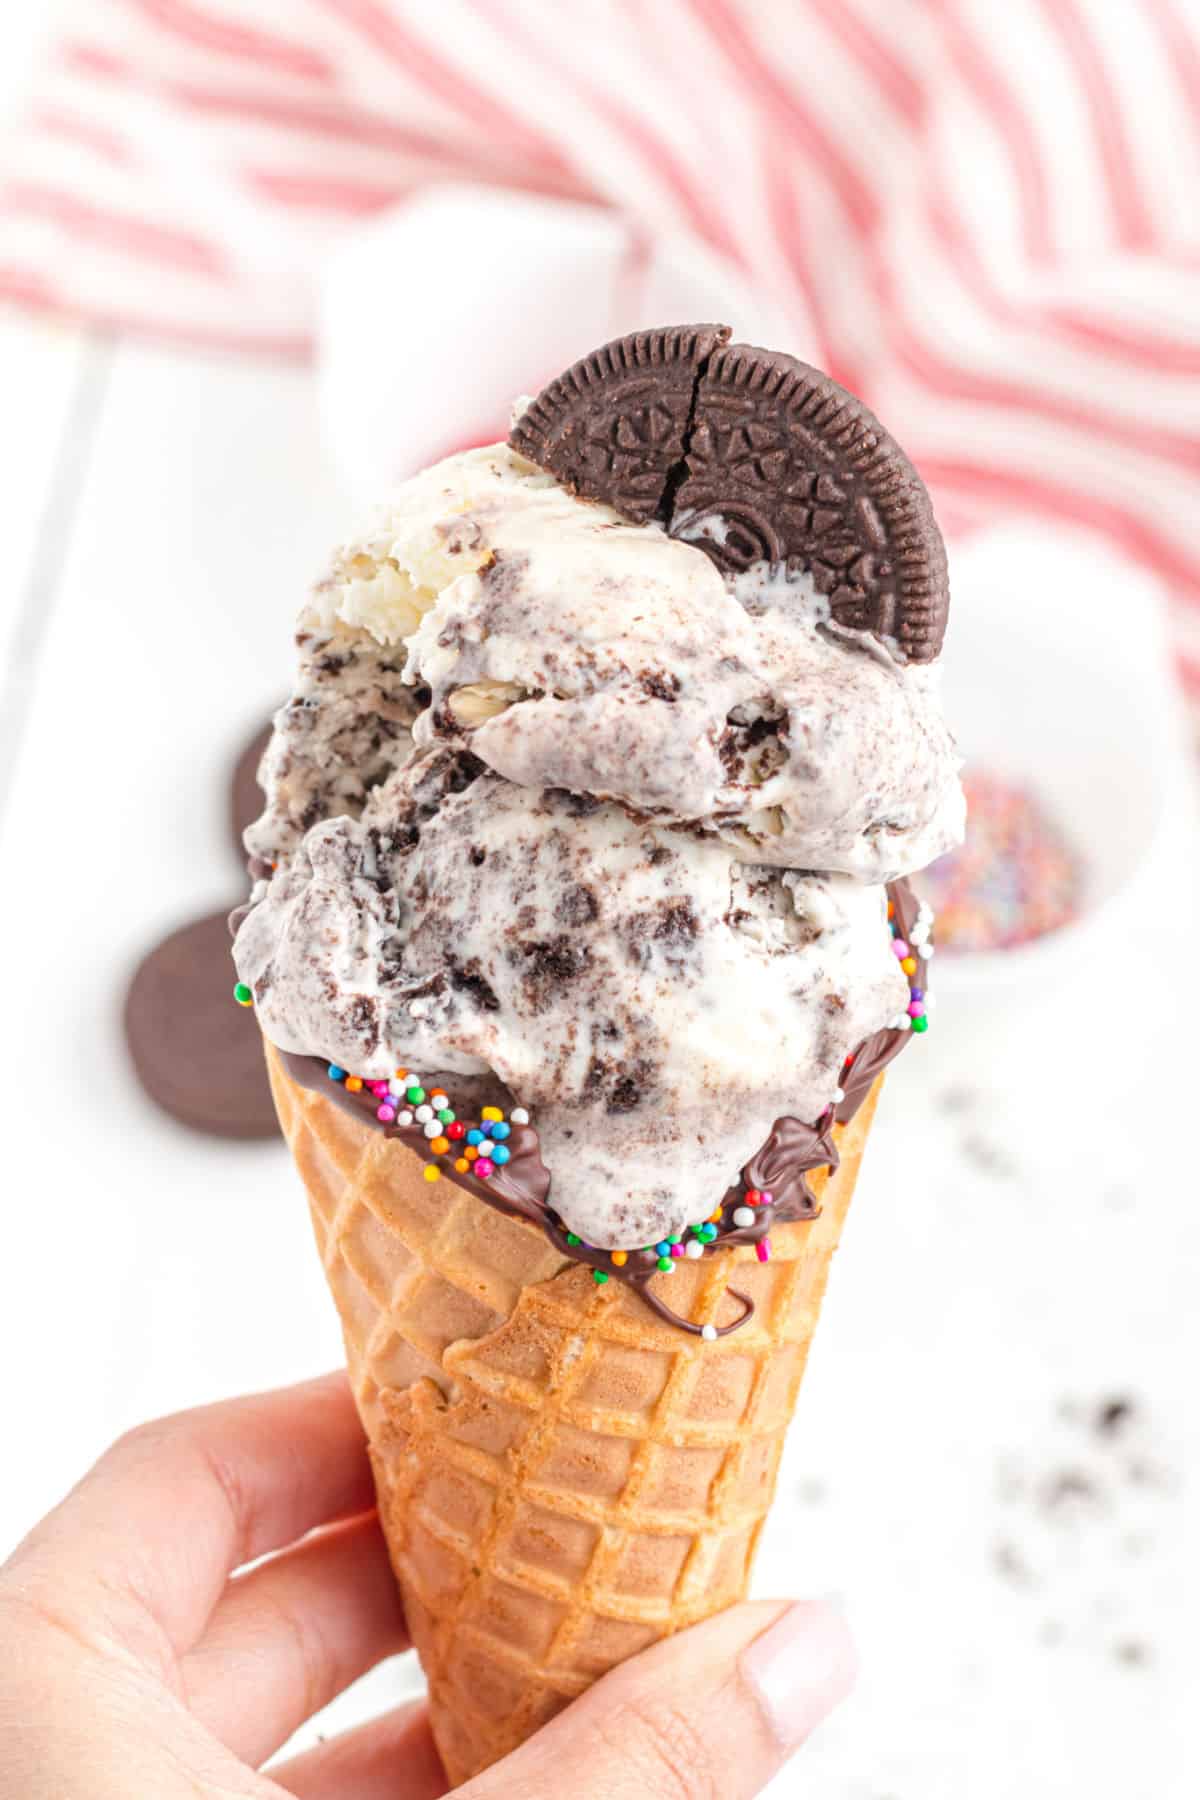 Cookies and cream ice cream in a waffle cone.